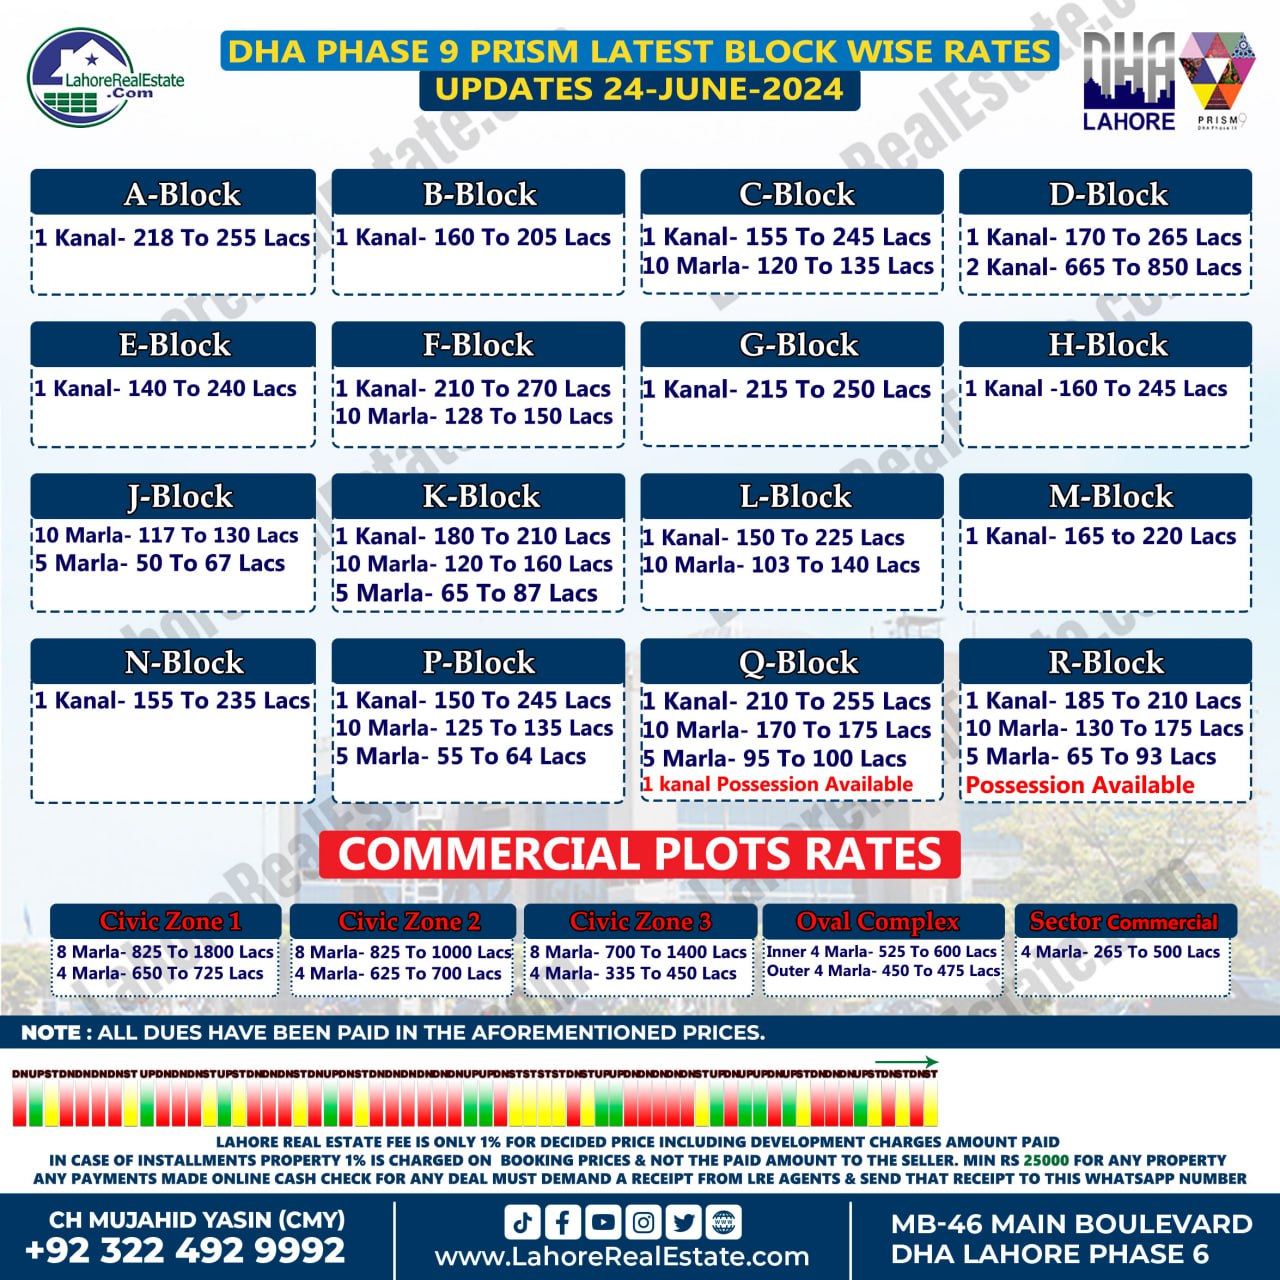 DHA Lahore Phase 9 Prism Plot Prices Blockwise Rates June 24, 2024